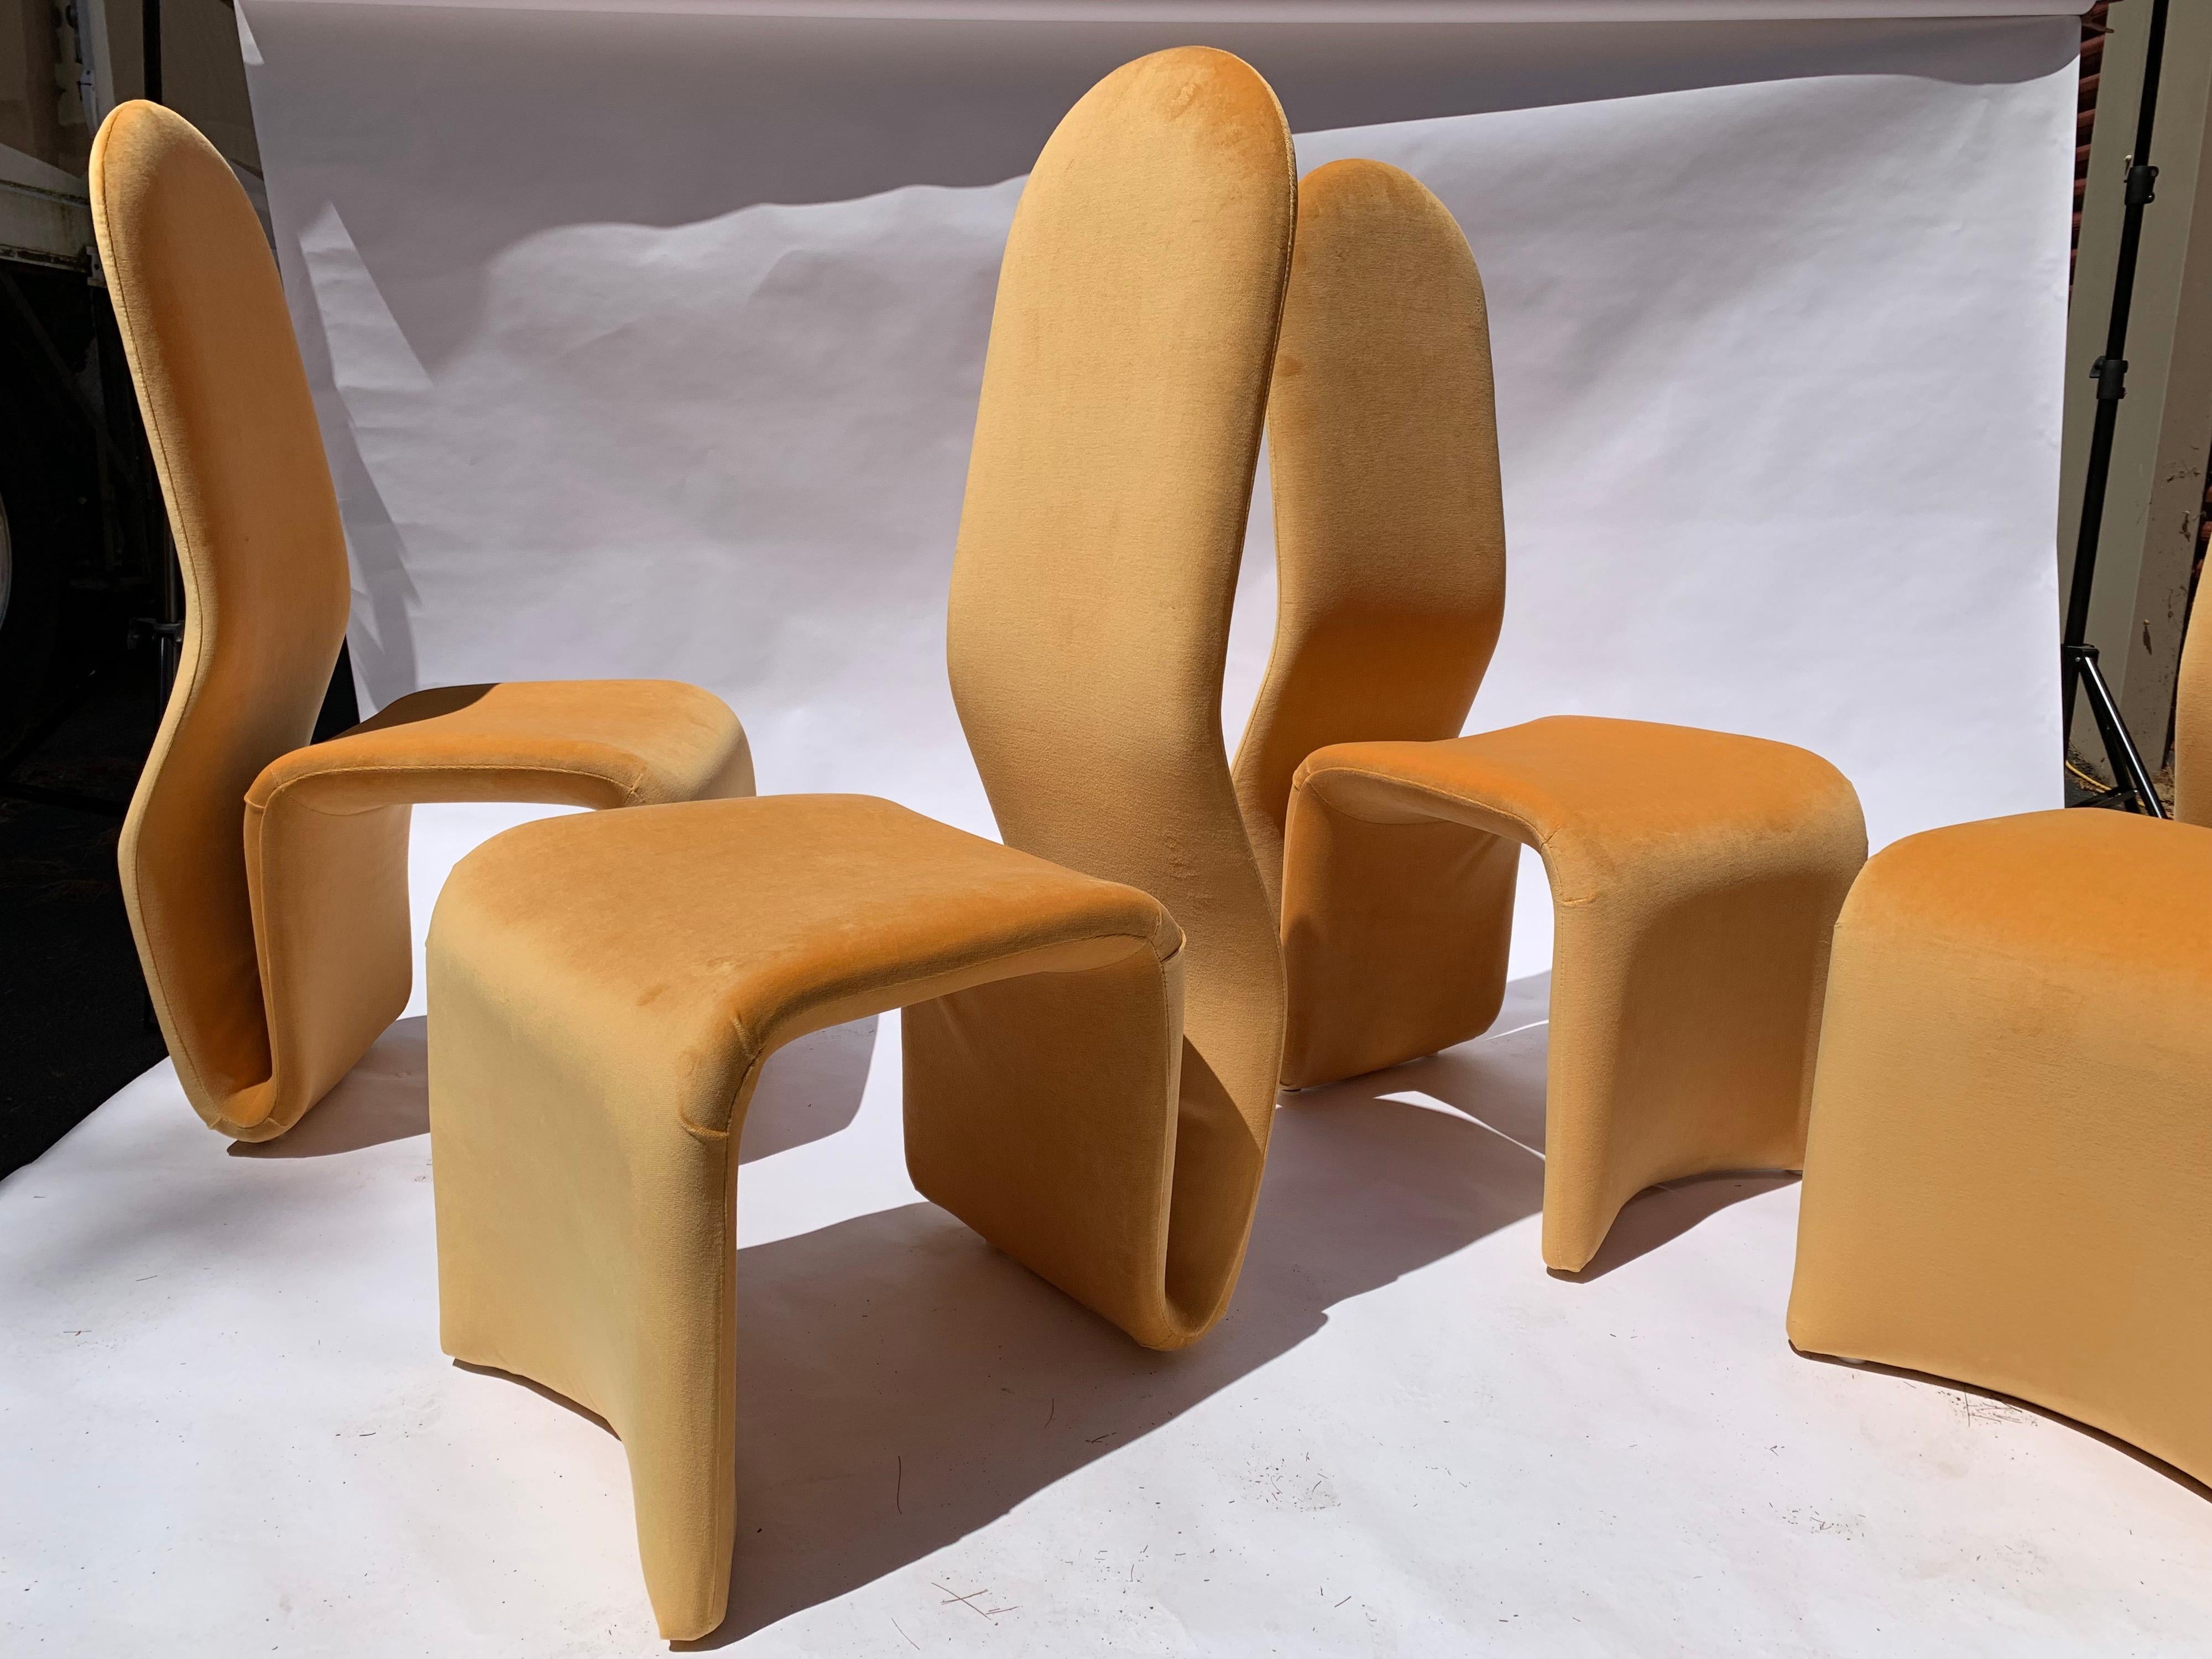 A beautiful set of sculptural dining chairs after Olivier Mourgue having steel pipe framing, slings for support and new upholstery. Excellent condition, circa 1975.